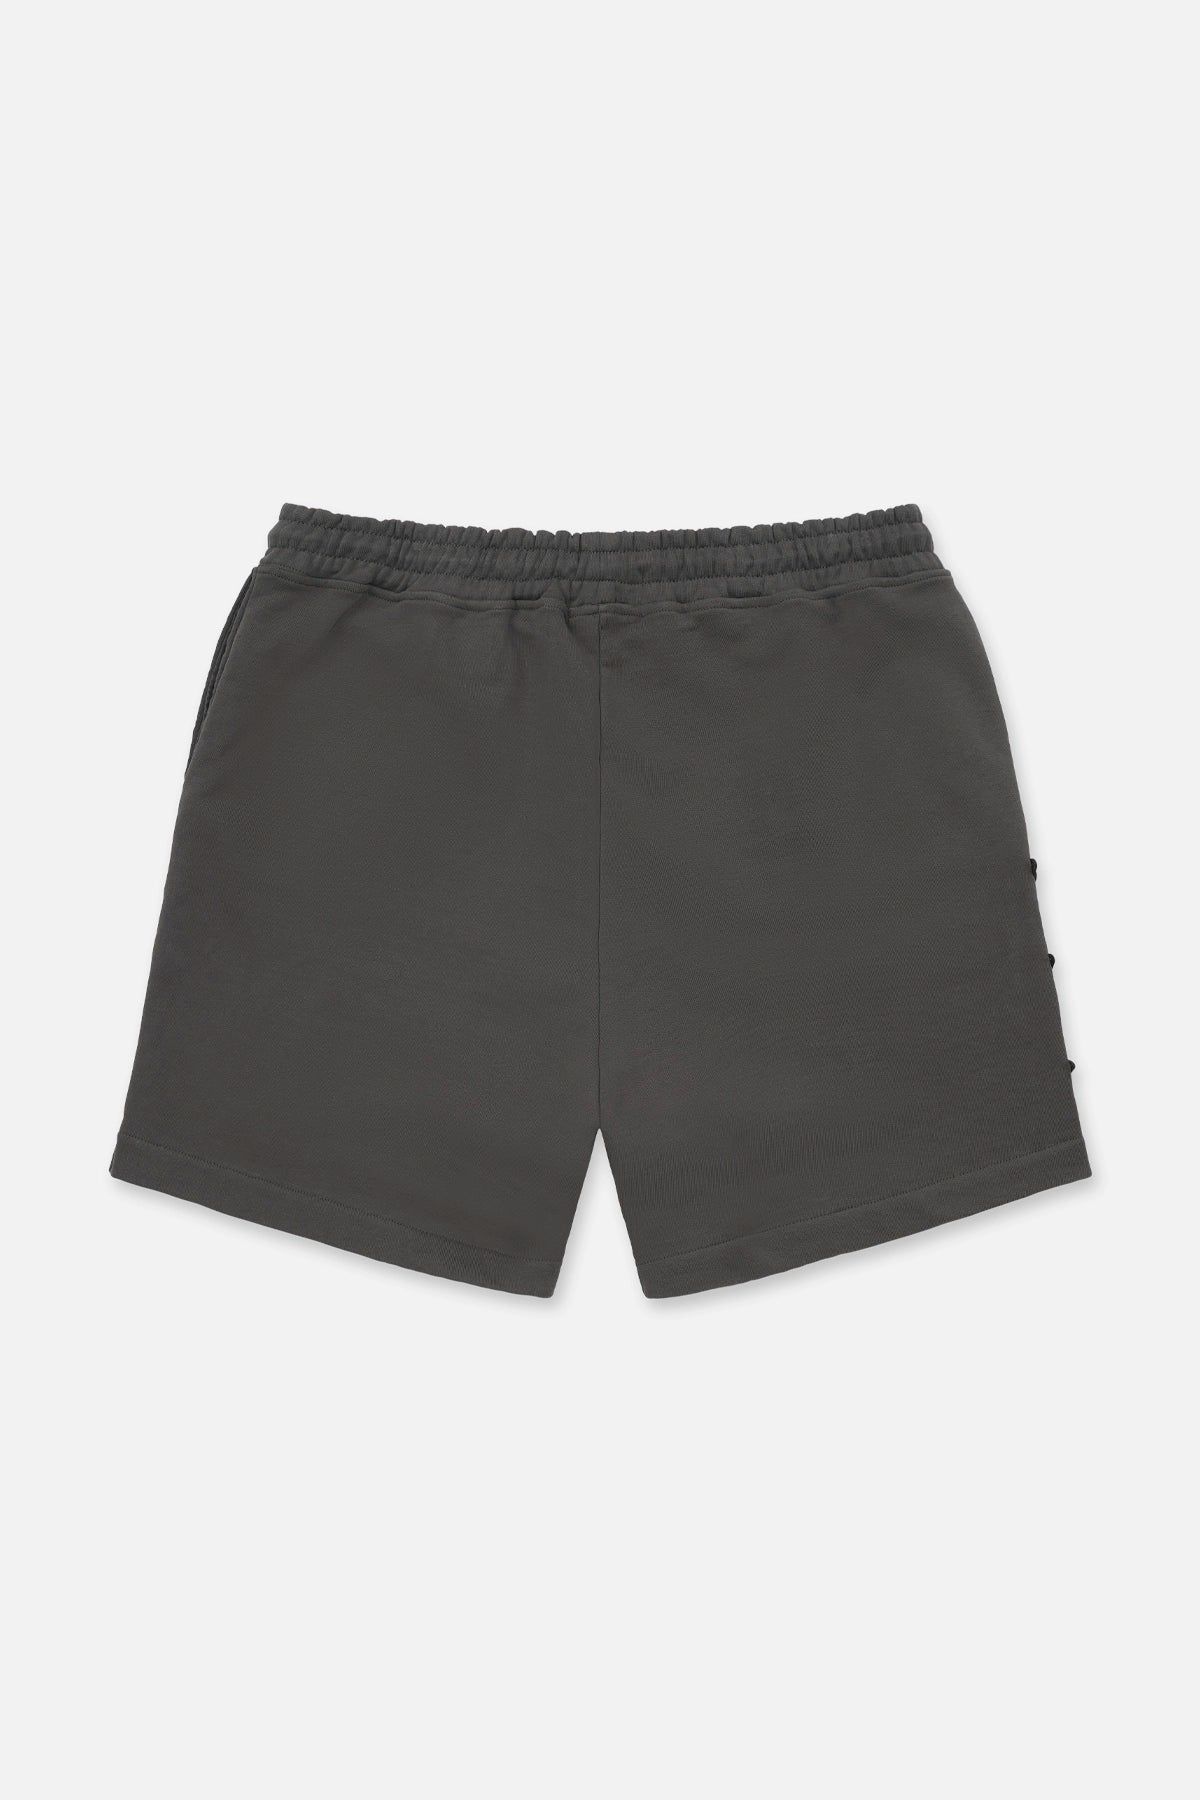 CLYDE | CHARCOAL COLLEGIATE